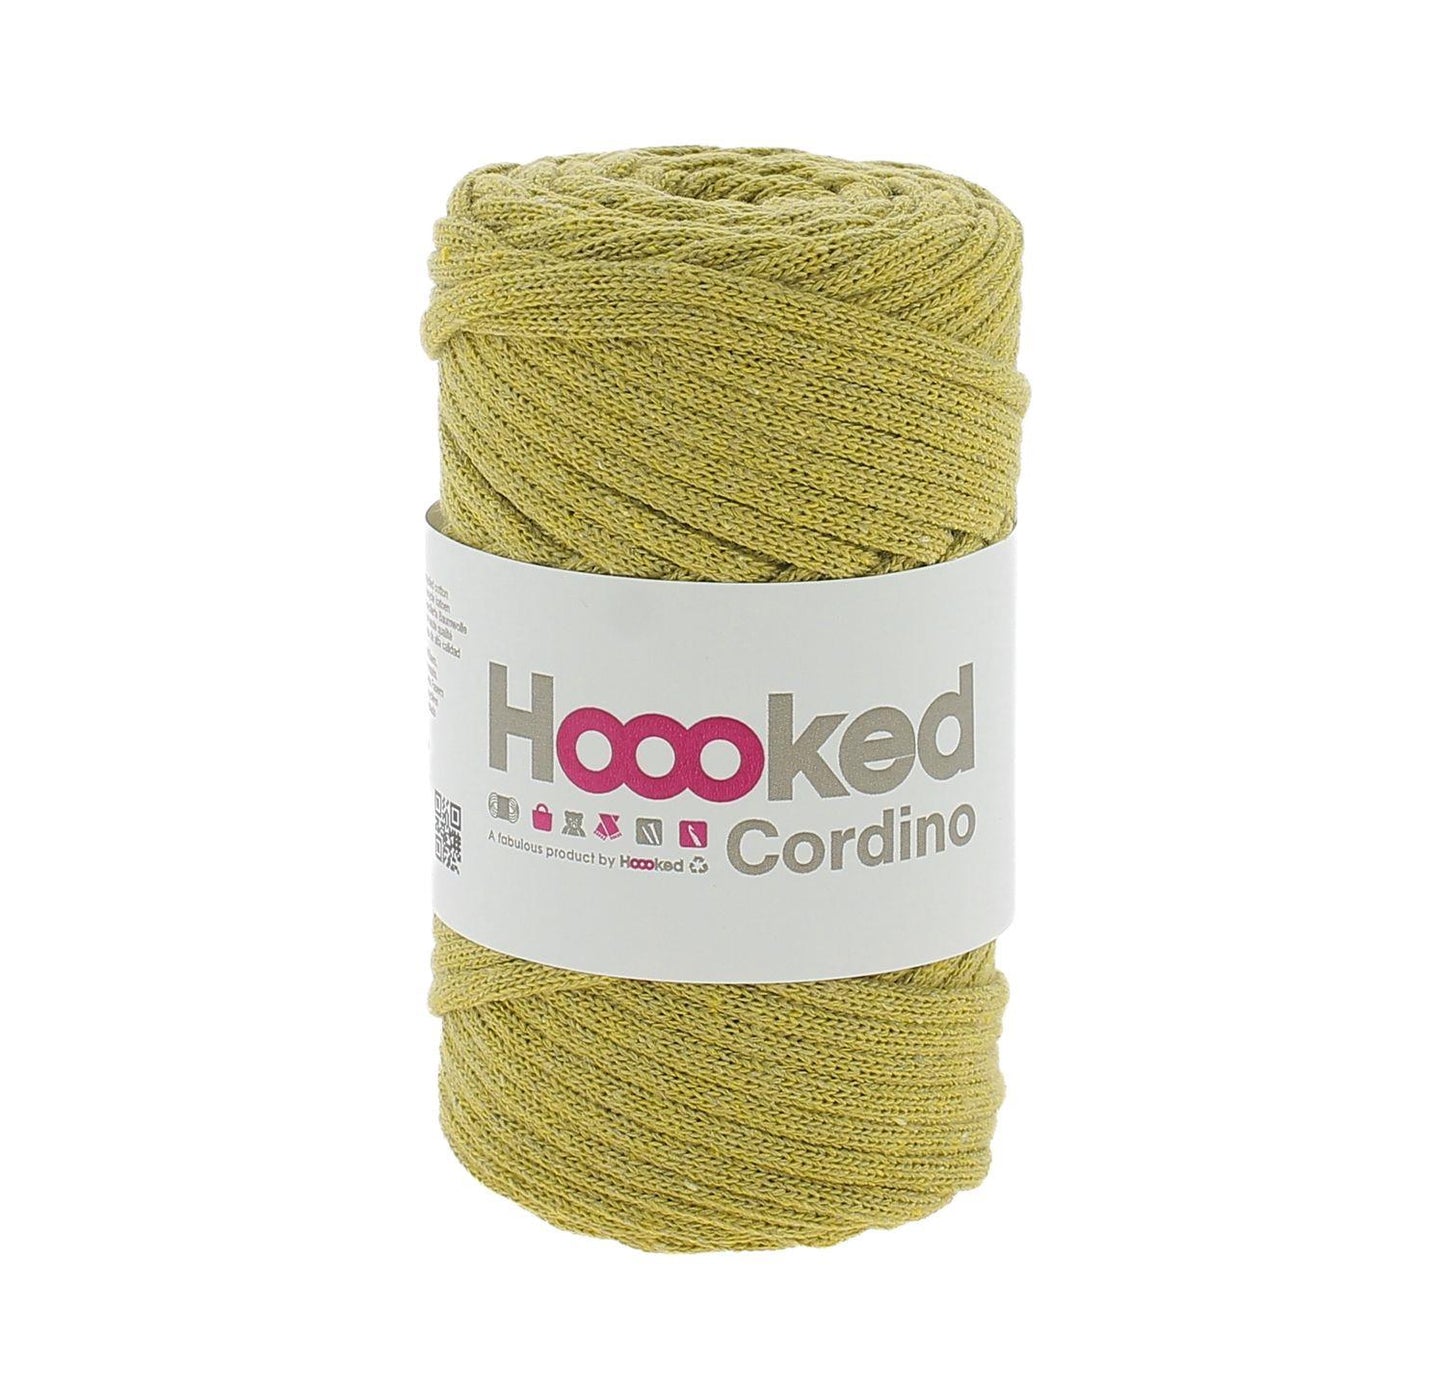 [Hoooked] Cordino Spicy Ocre Cotton Macrame Cord - 54M, 150g